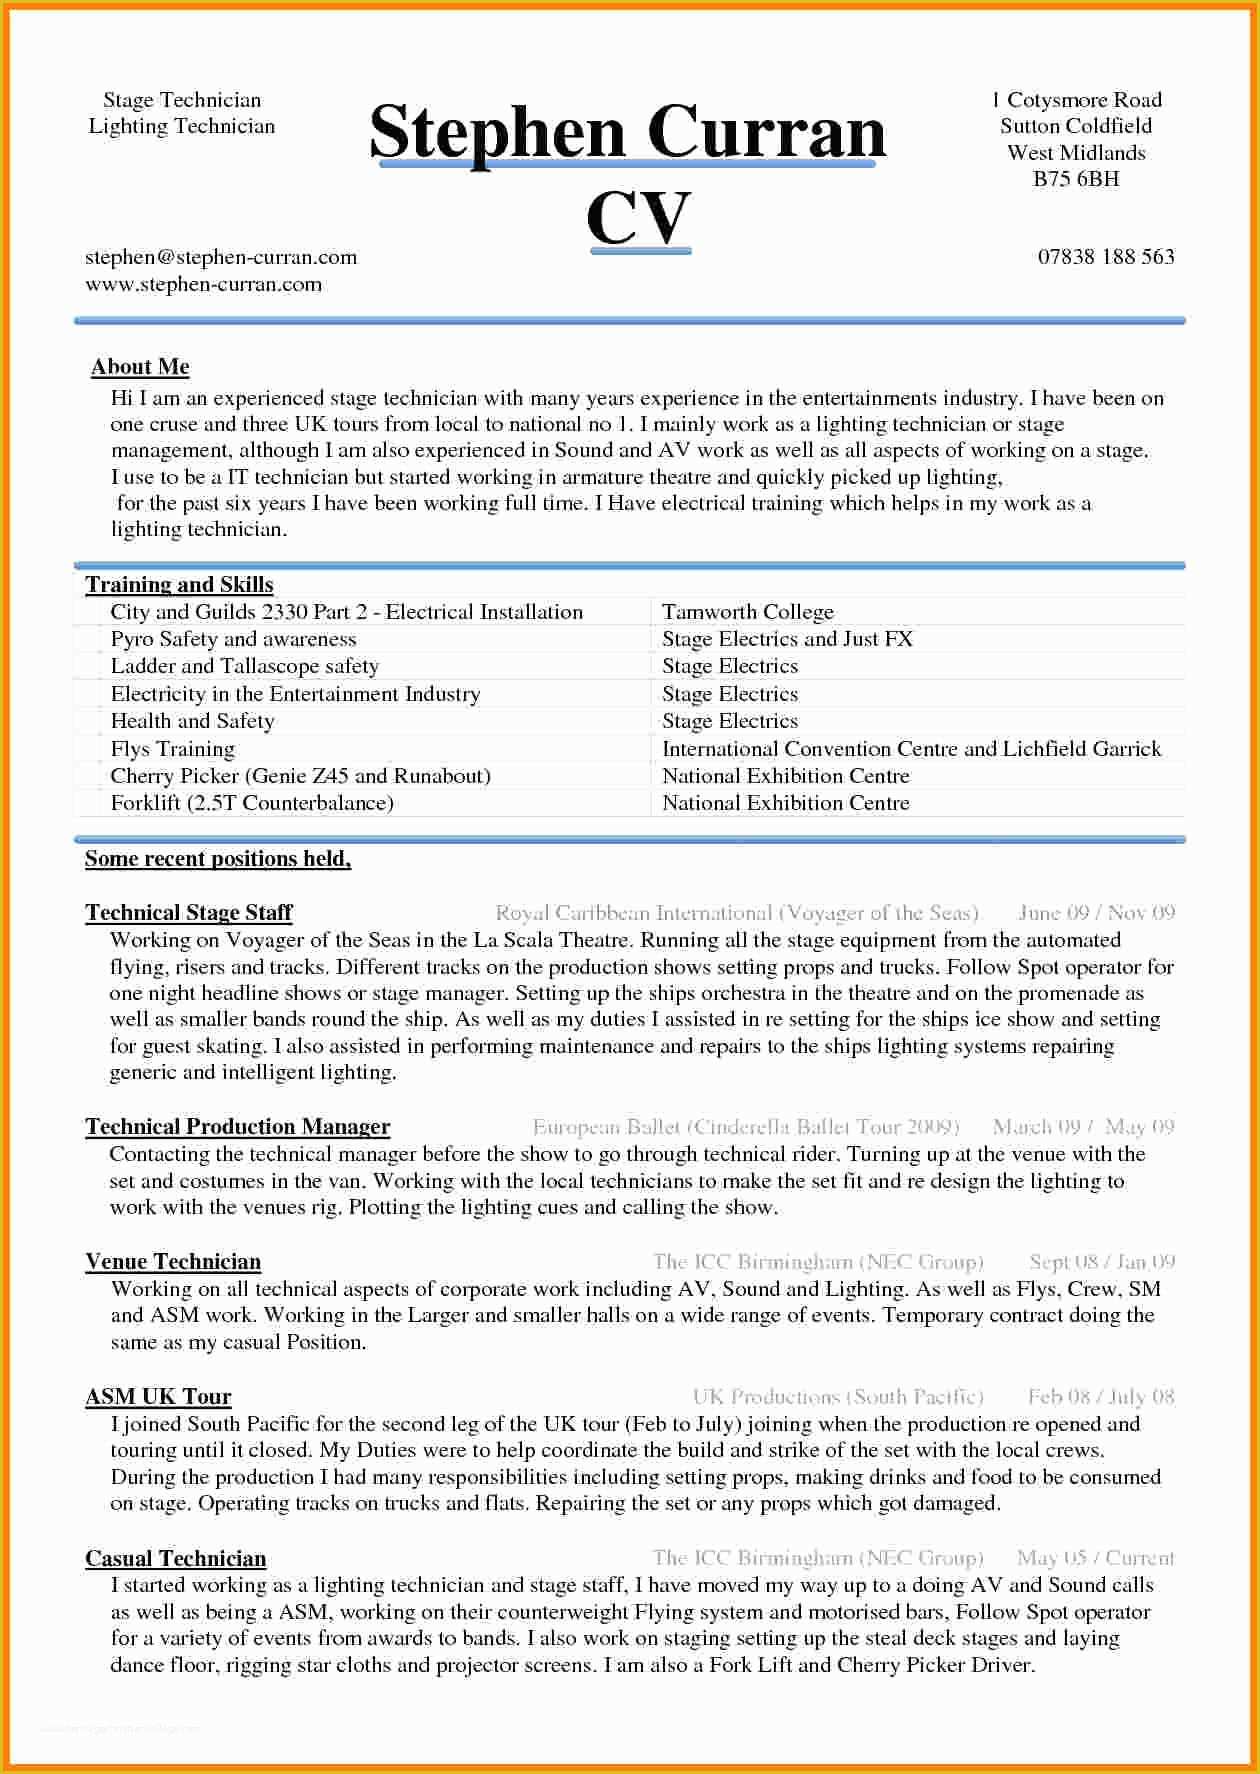 Word Document Templates Free Of 5 Cv Sample Word Document